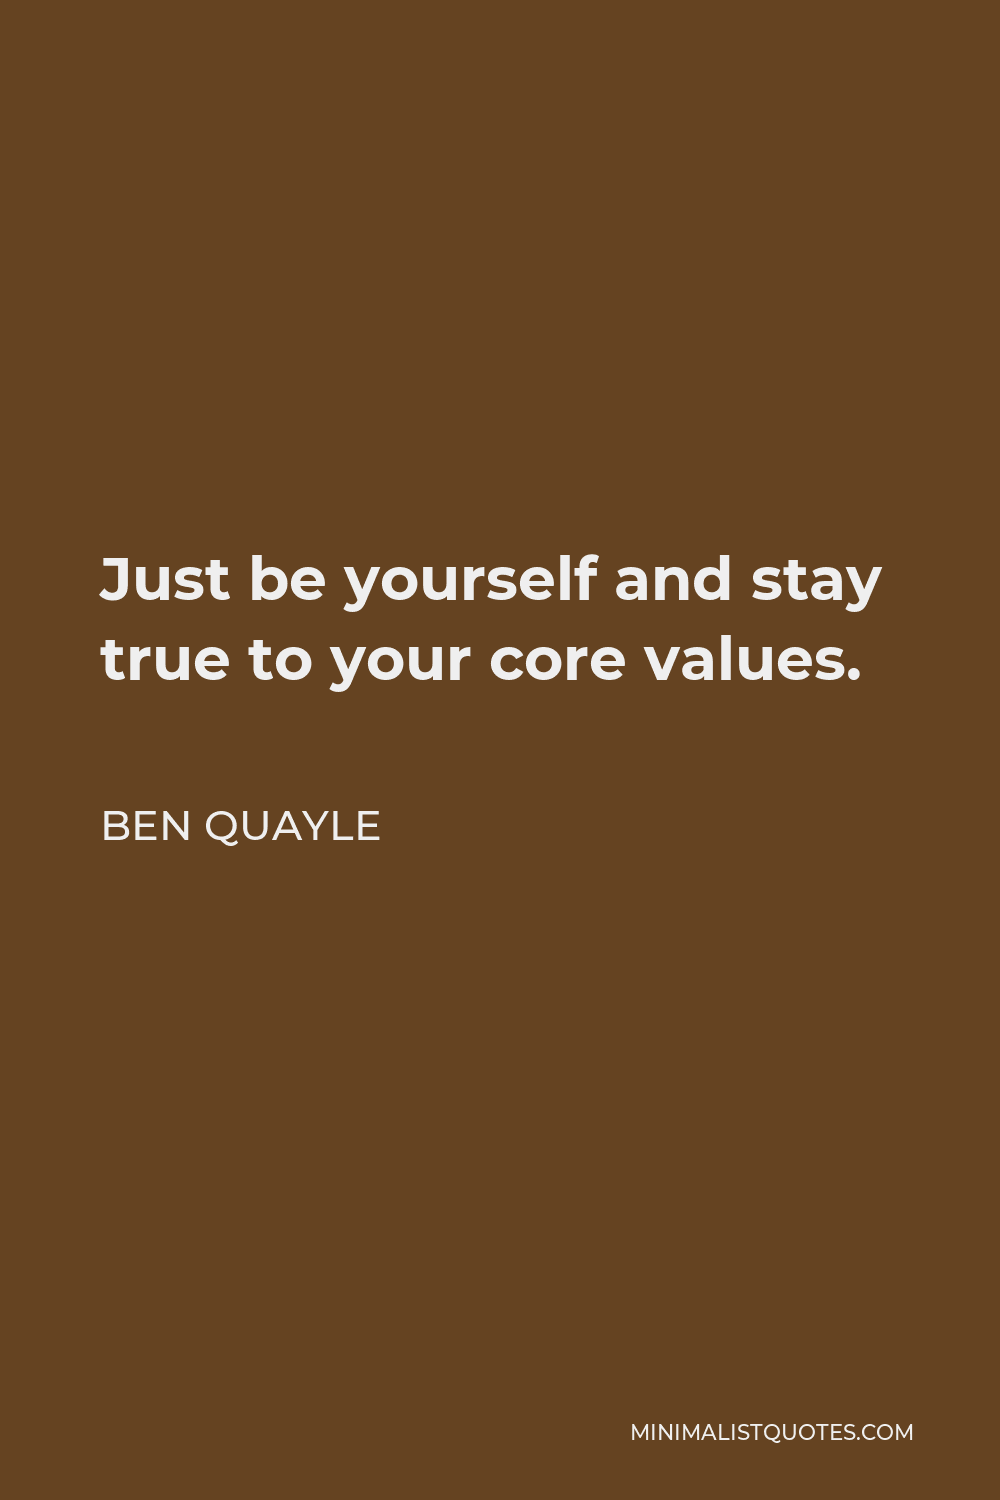 Ben Quayle Quote - Just be yourself and stay true to your core values.